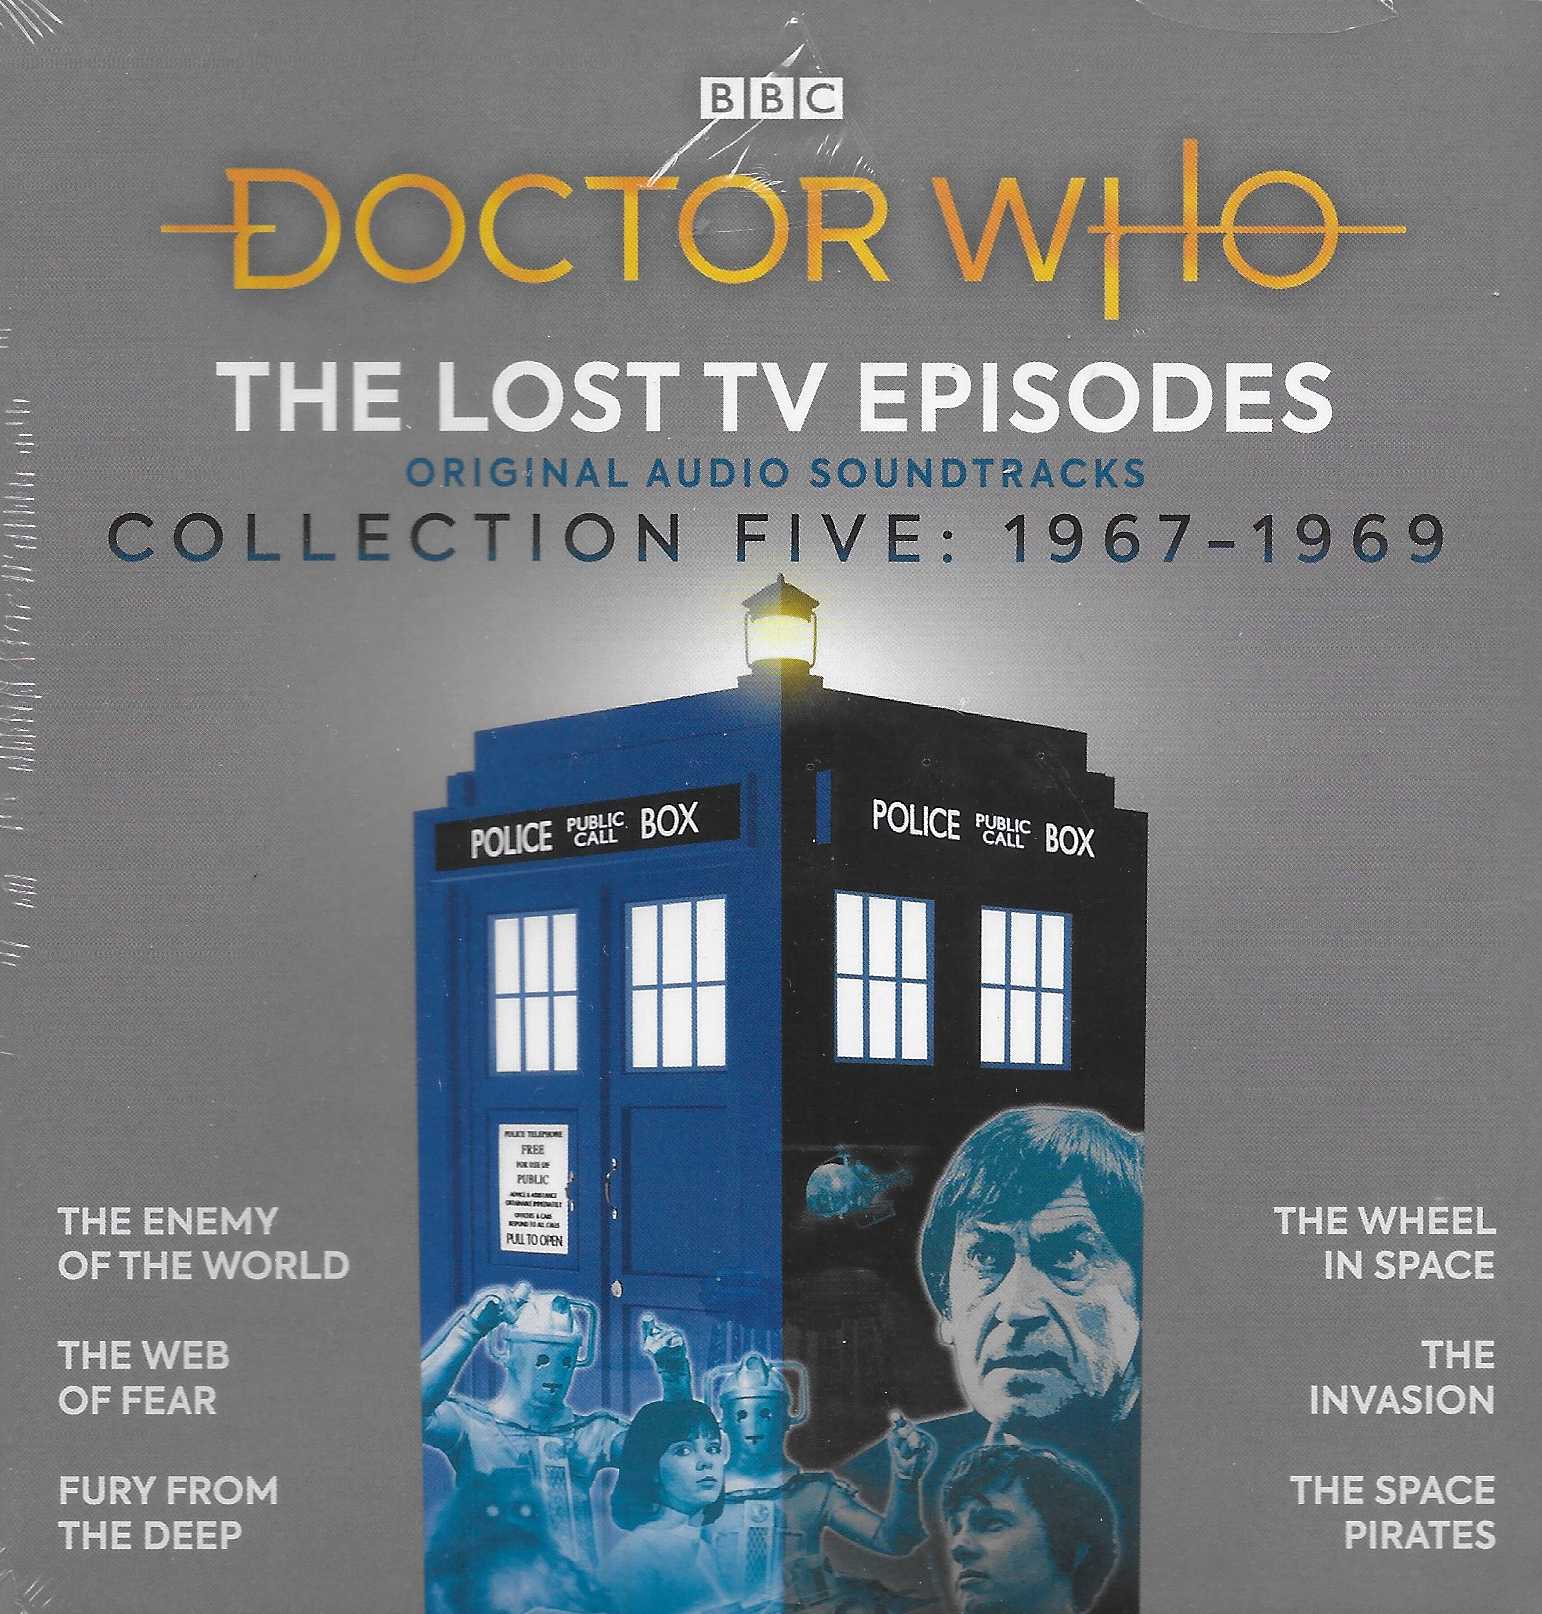 Picture of Doctor Who - The lost TV episodes - Collection five: 1967-1969 by artist Various from the BBC cds - Records and Tapes library